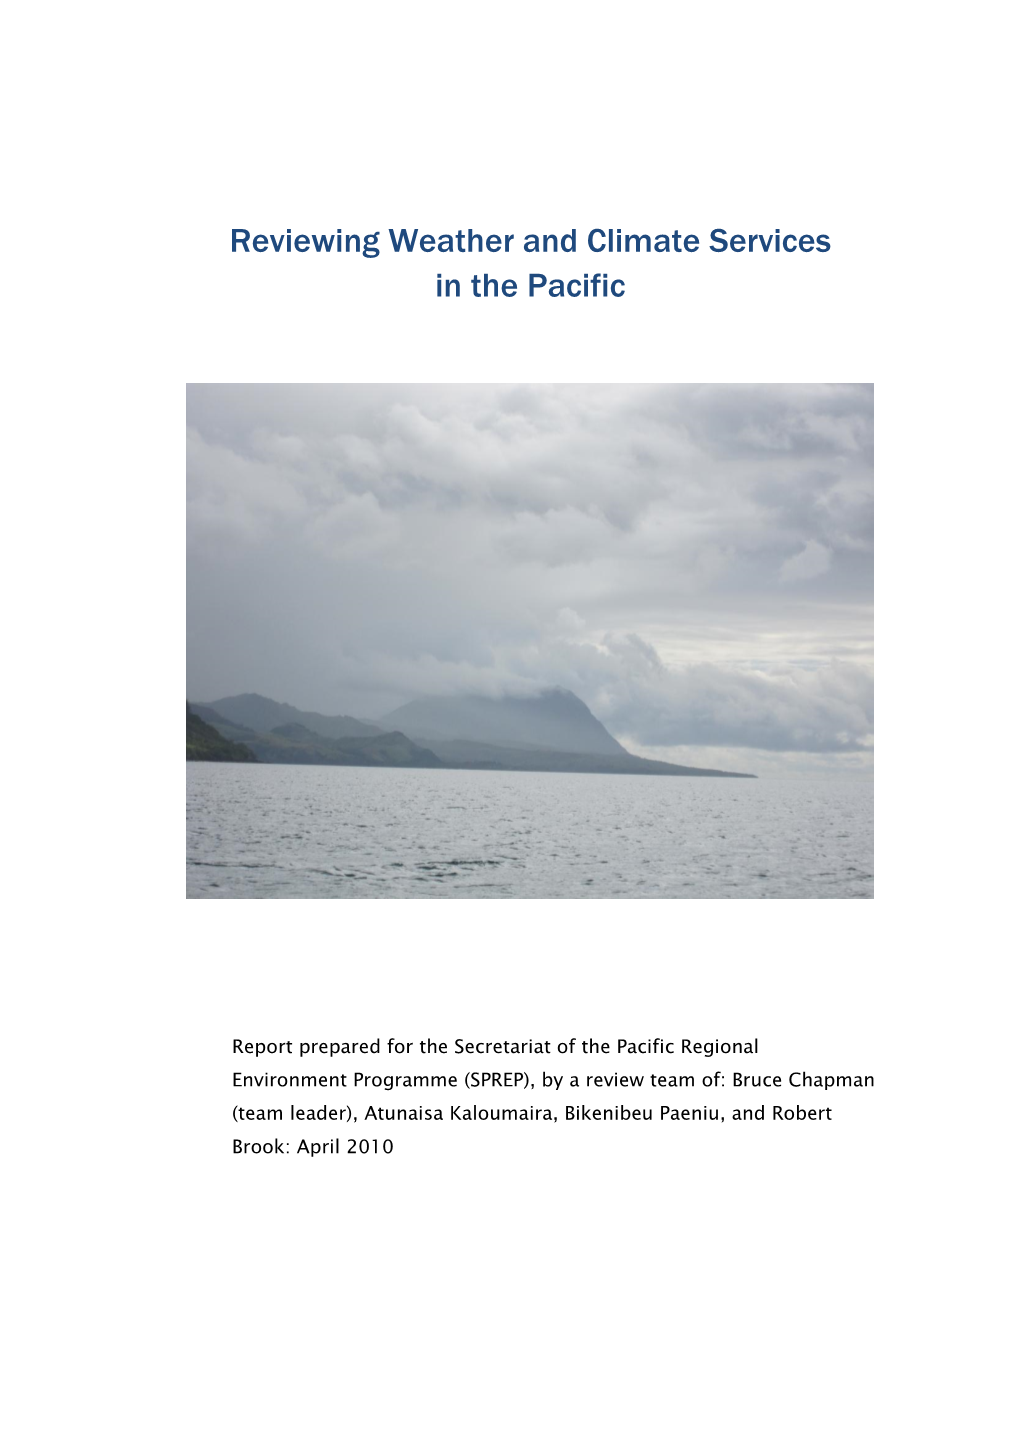 Weather and Climate Services in the Pacific